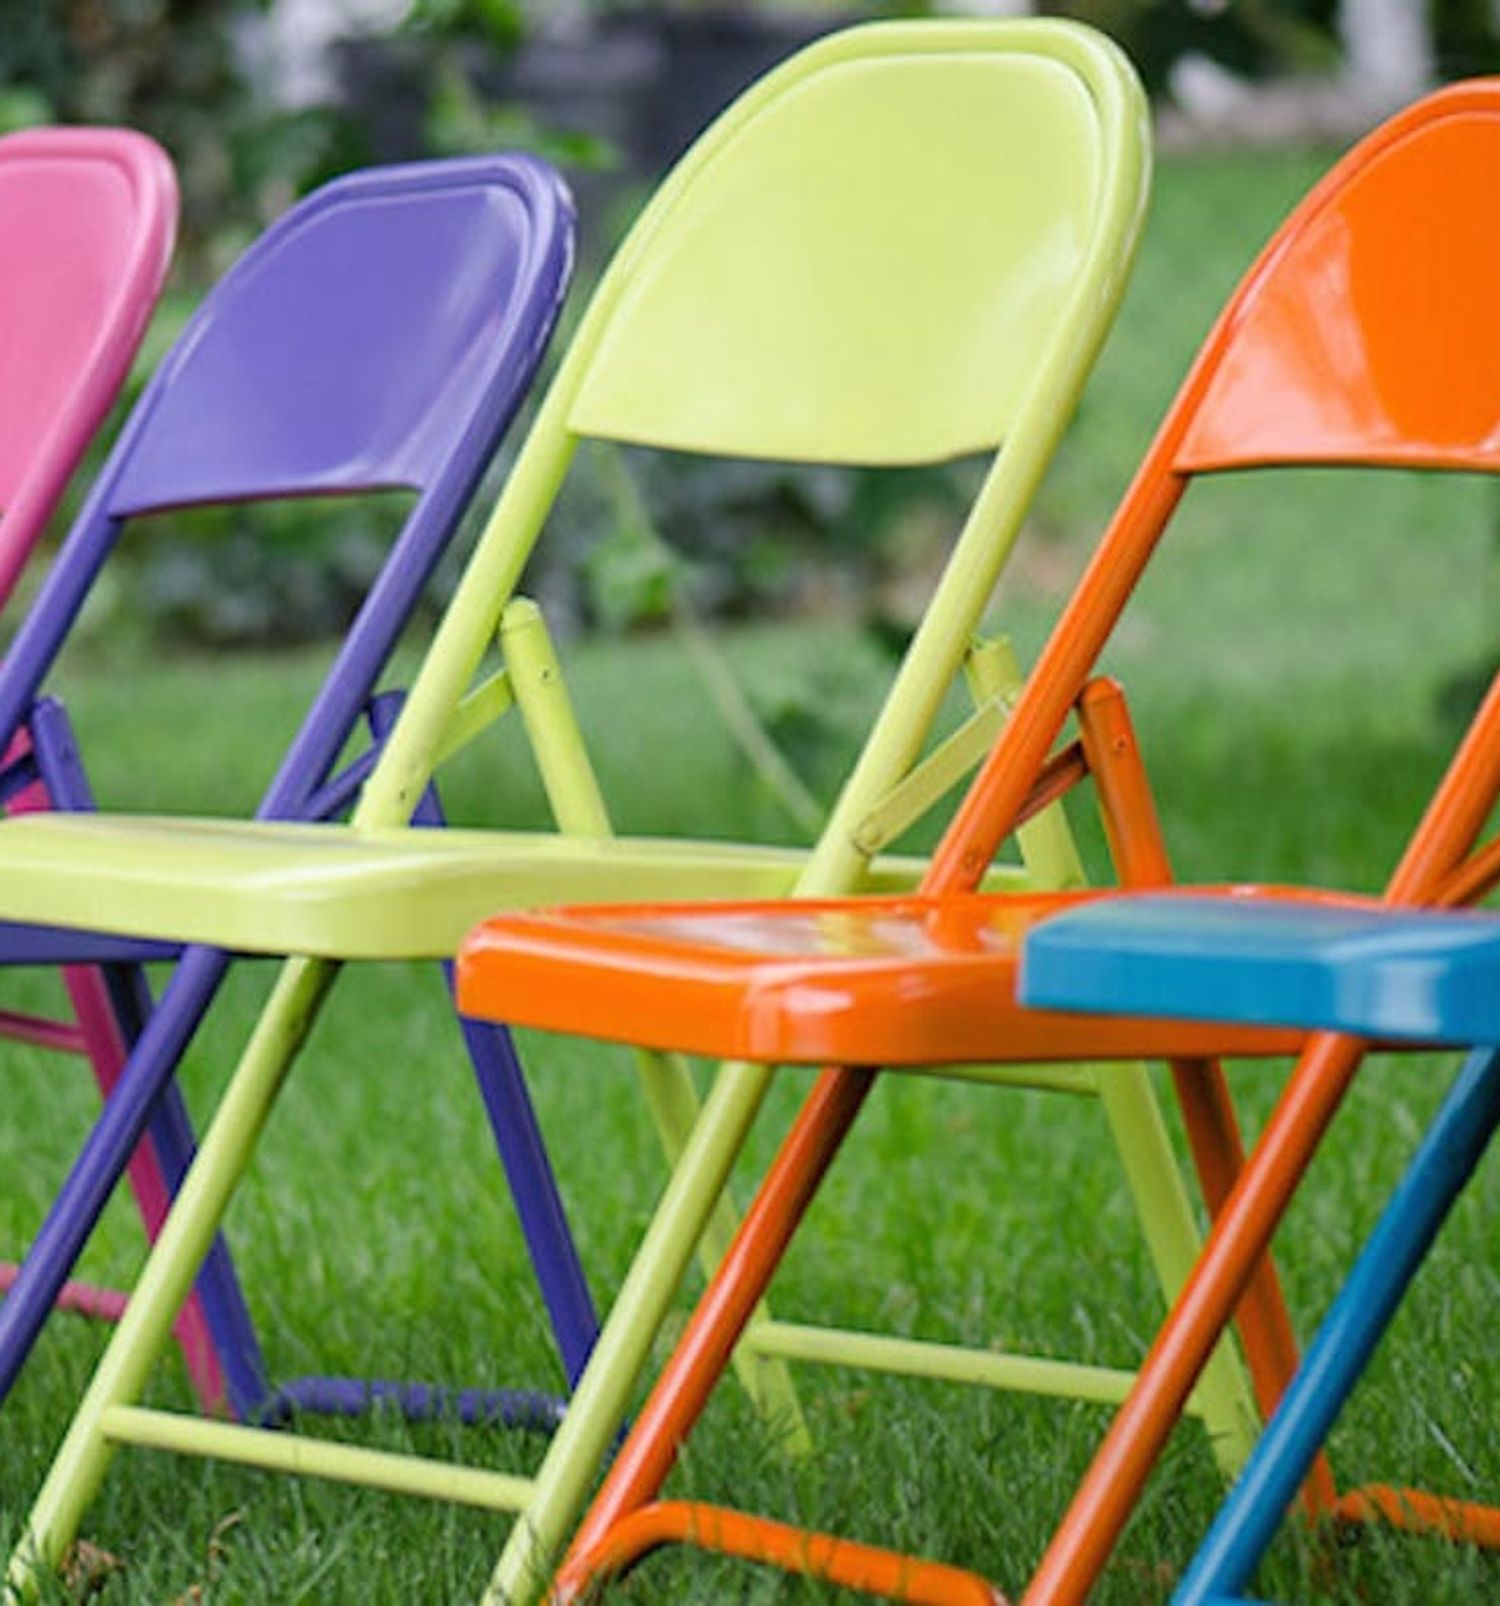 How to make a folding chair look nice